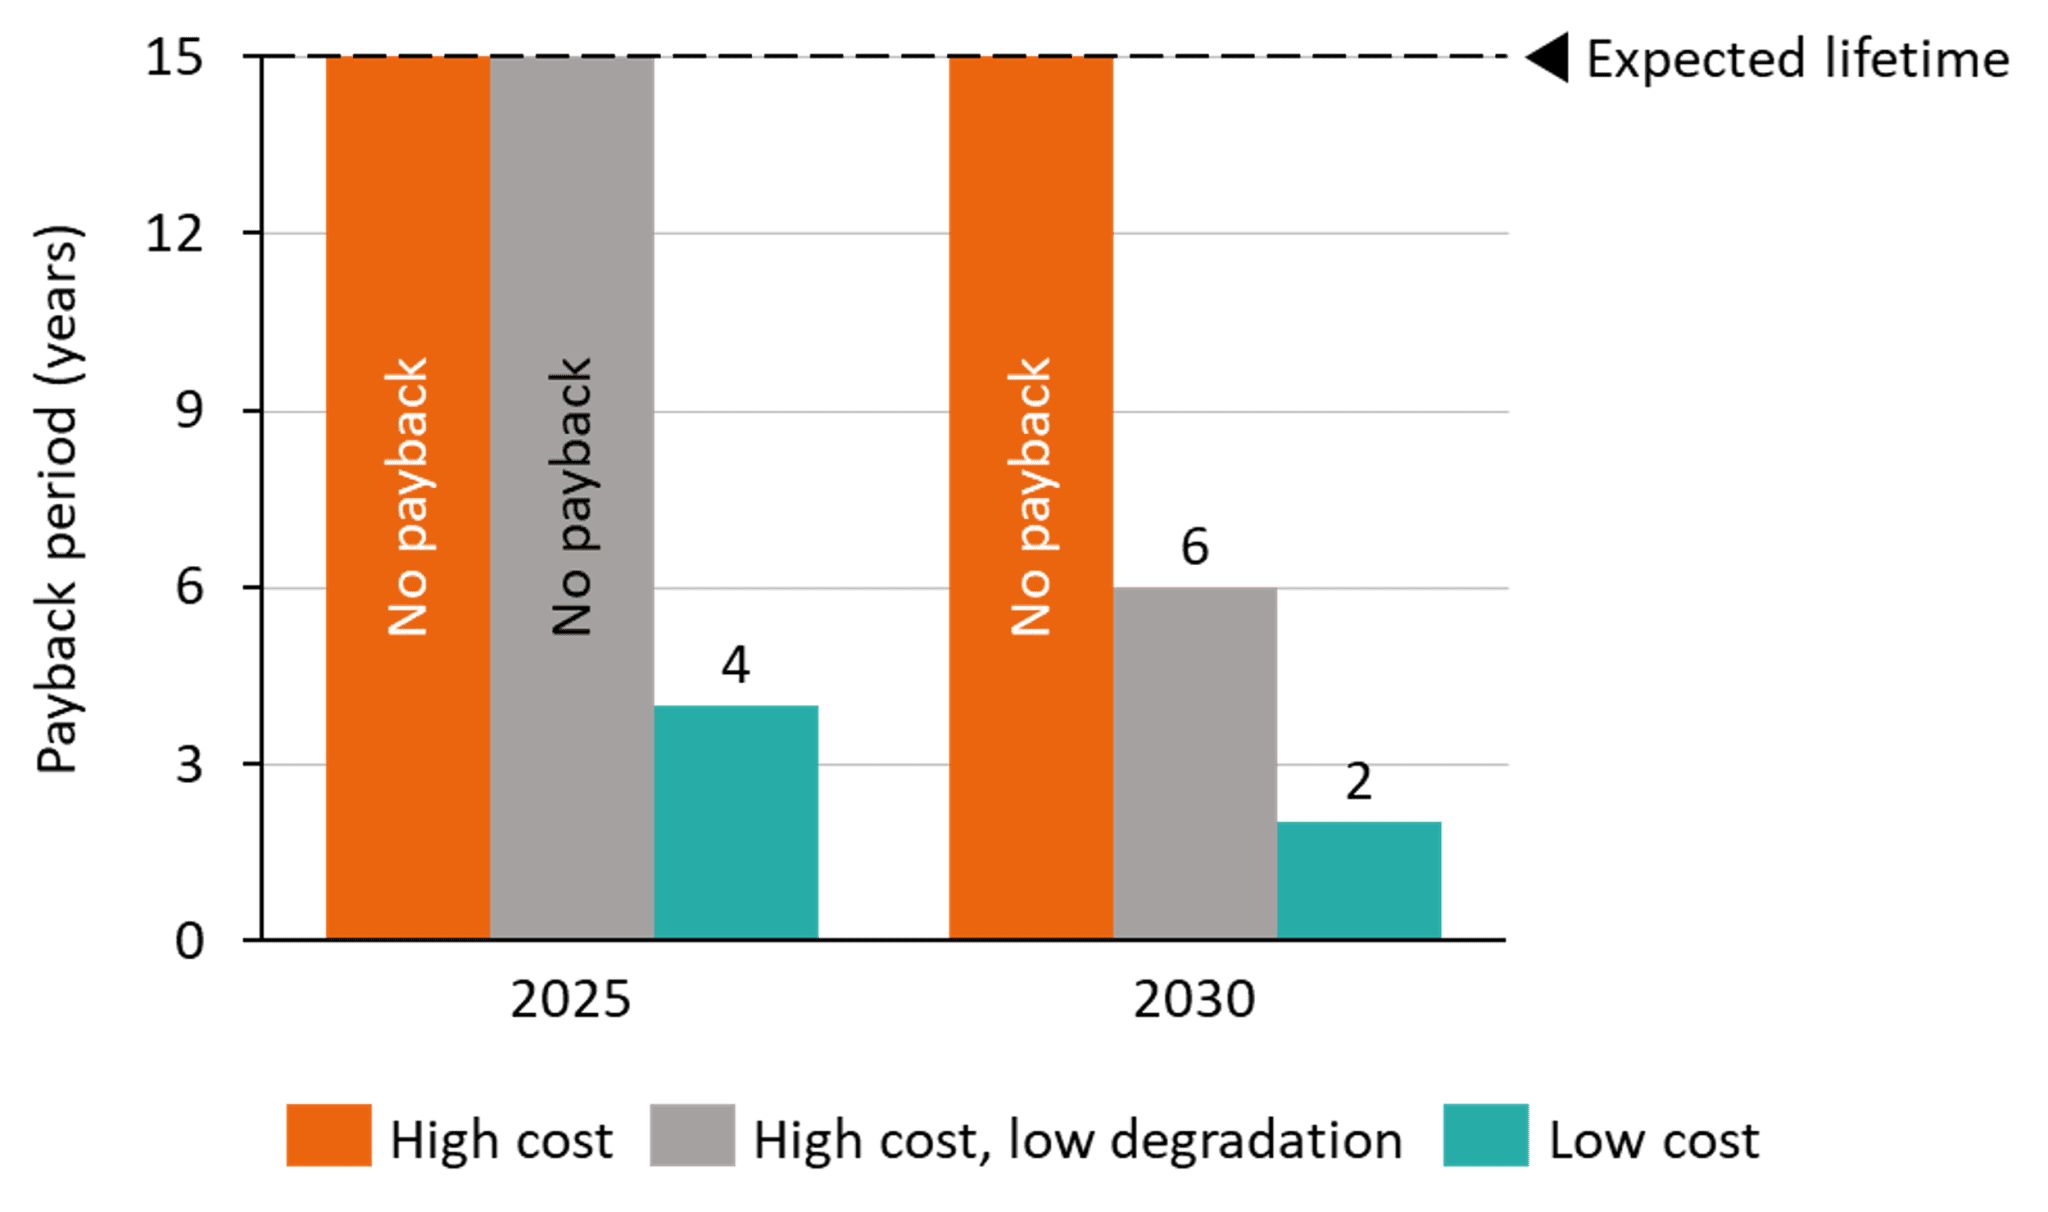 igure shows the payback period (years) for trucks in an urban depot installing V2G solution in 2025 and 2030 over high and low-cost scenarios. Under the low-cost scenario, the investment in V2G is expected to be paid back within 4 years if installed in 2025, and within 2 year if installed in 2030. There is no payback for the V2G solution within the assumed 15-year hardware lifetime under the high-cost scenario in either 2025 or 2030.
Figure additionally shows a sensitivity considering high upfront and ongoing maintenance costs, but low degradation costs. There is no payback within the 15-year lifetime if installed in 2025, and a payback period of 6 years if installed in 2030.